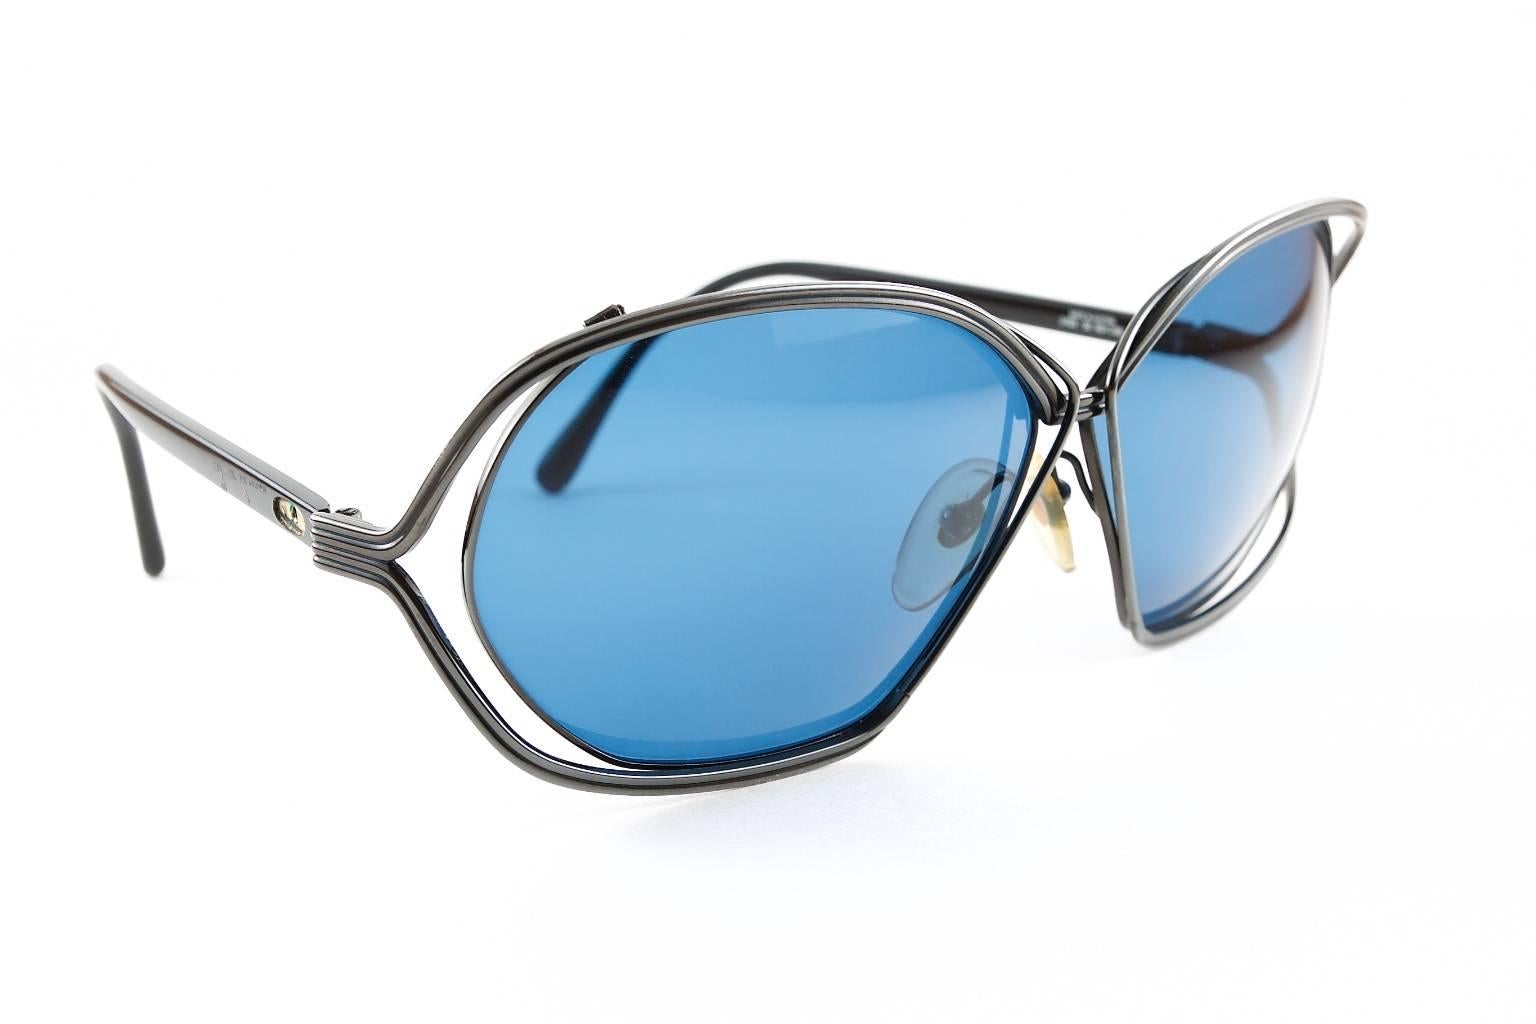 Feminine & classic Dior model from the Eighties. These feature the famous 'butterfly-design' and have new blue lenses. NOS (new old-stock).

_____________________________________________________________
Established in 2005, Hotel de Ville is the